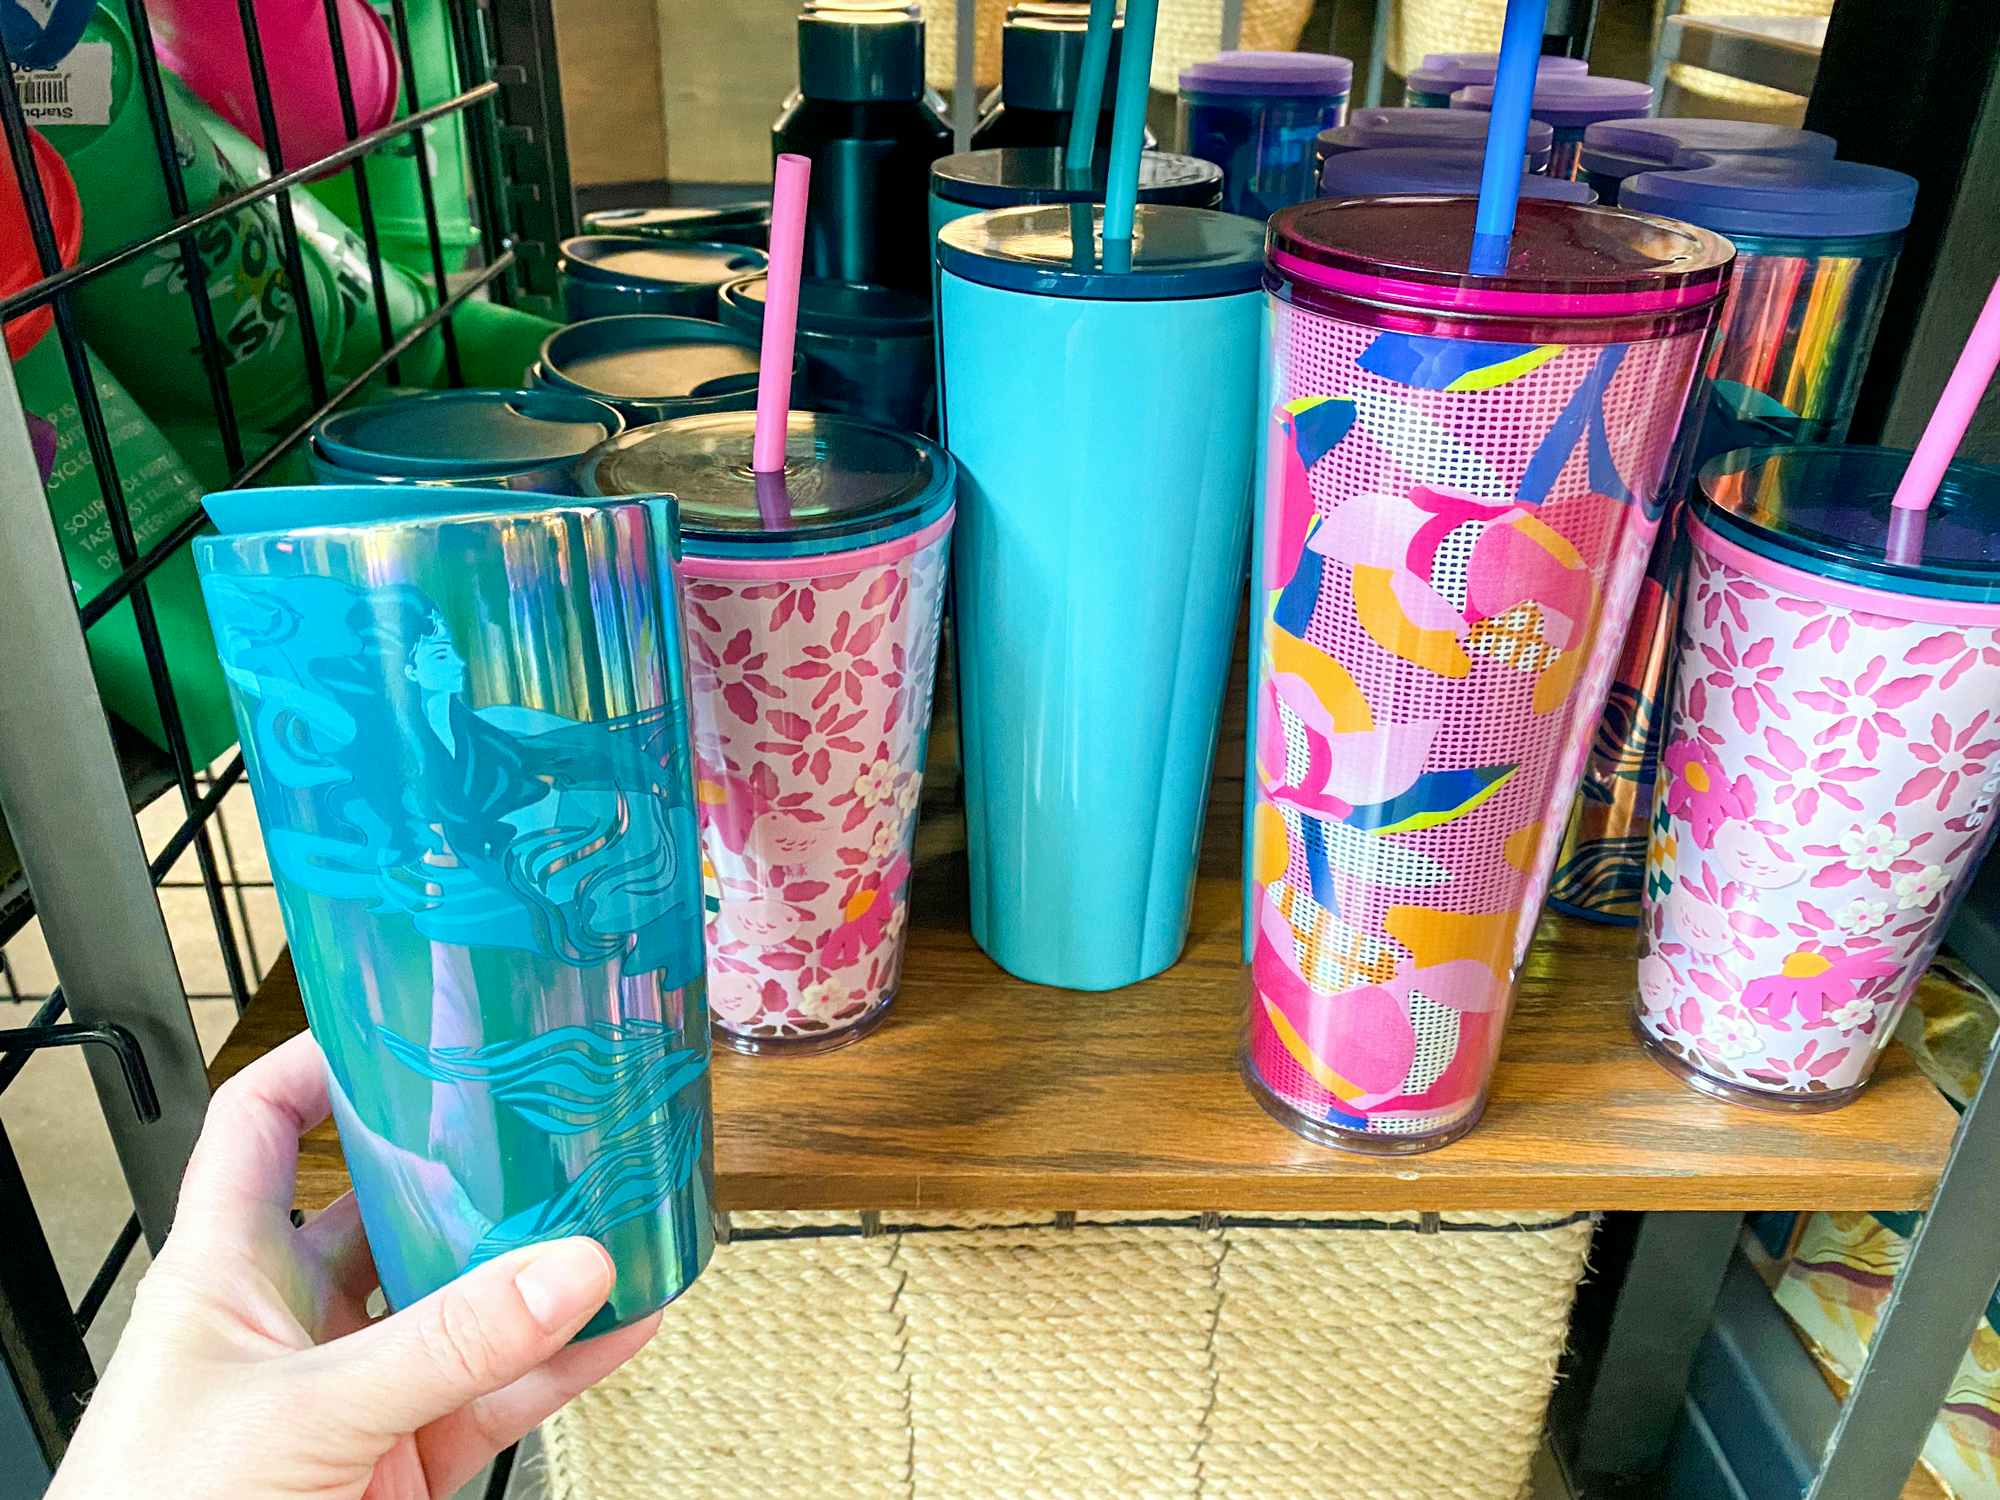 https://prod-cdn-thekrazycouponlady.imgix.net/wp-content/uploads/2023/02/0323-starbucks-spring-cups-hot-mermaid-holographic-1679667611-1679667611.jpg?auto=format&fit=fill&q=25